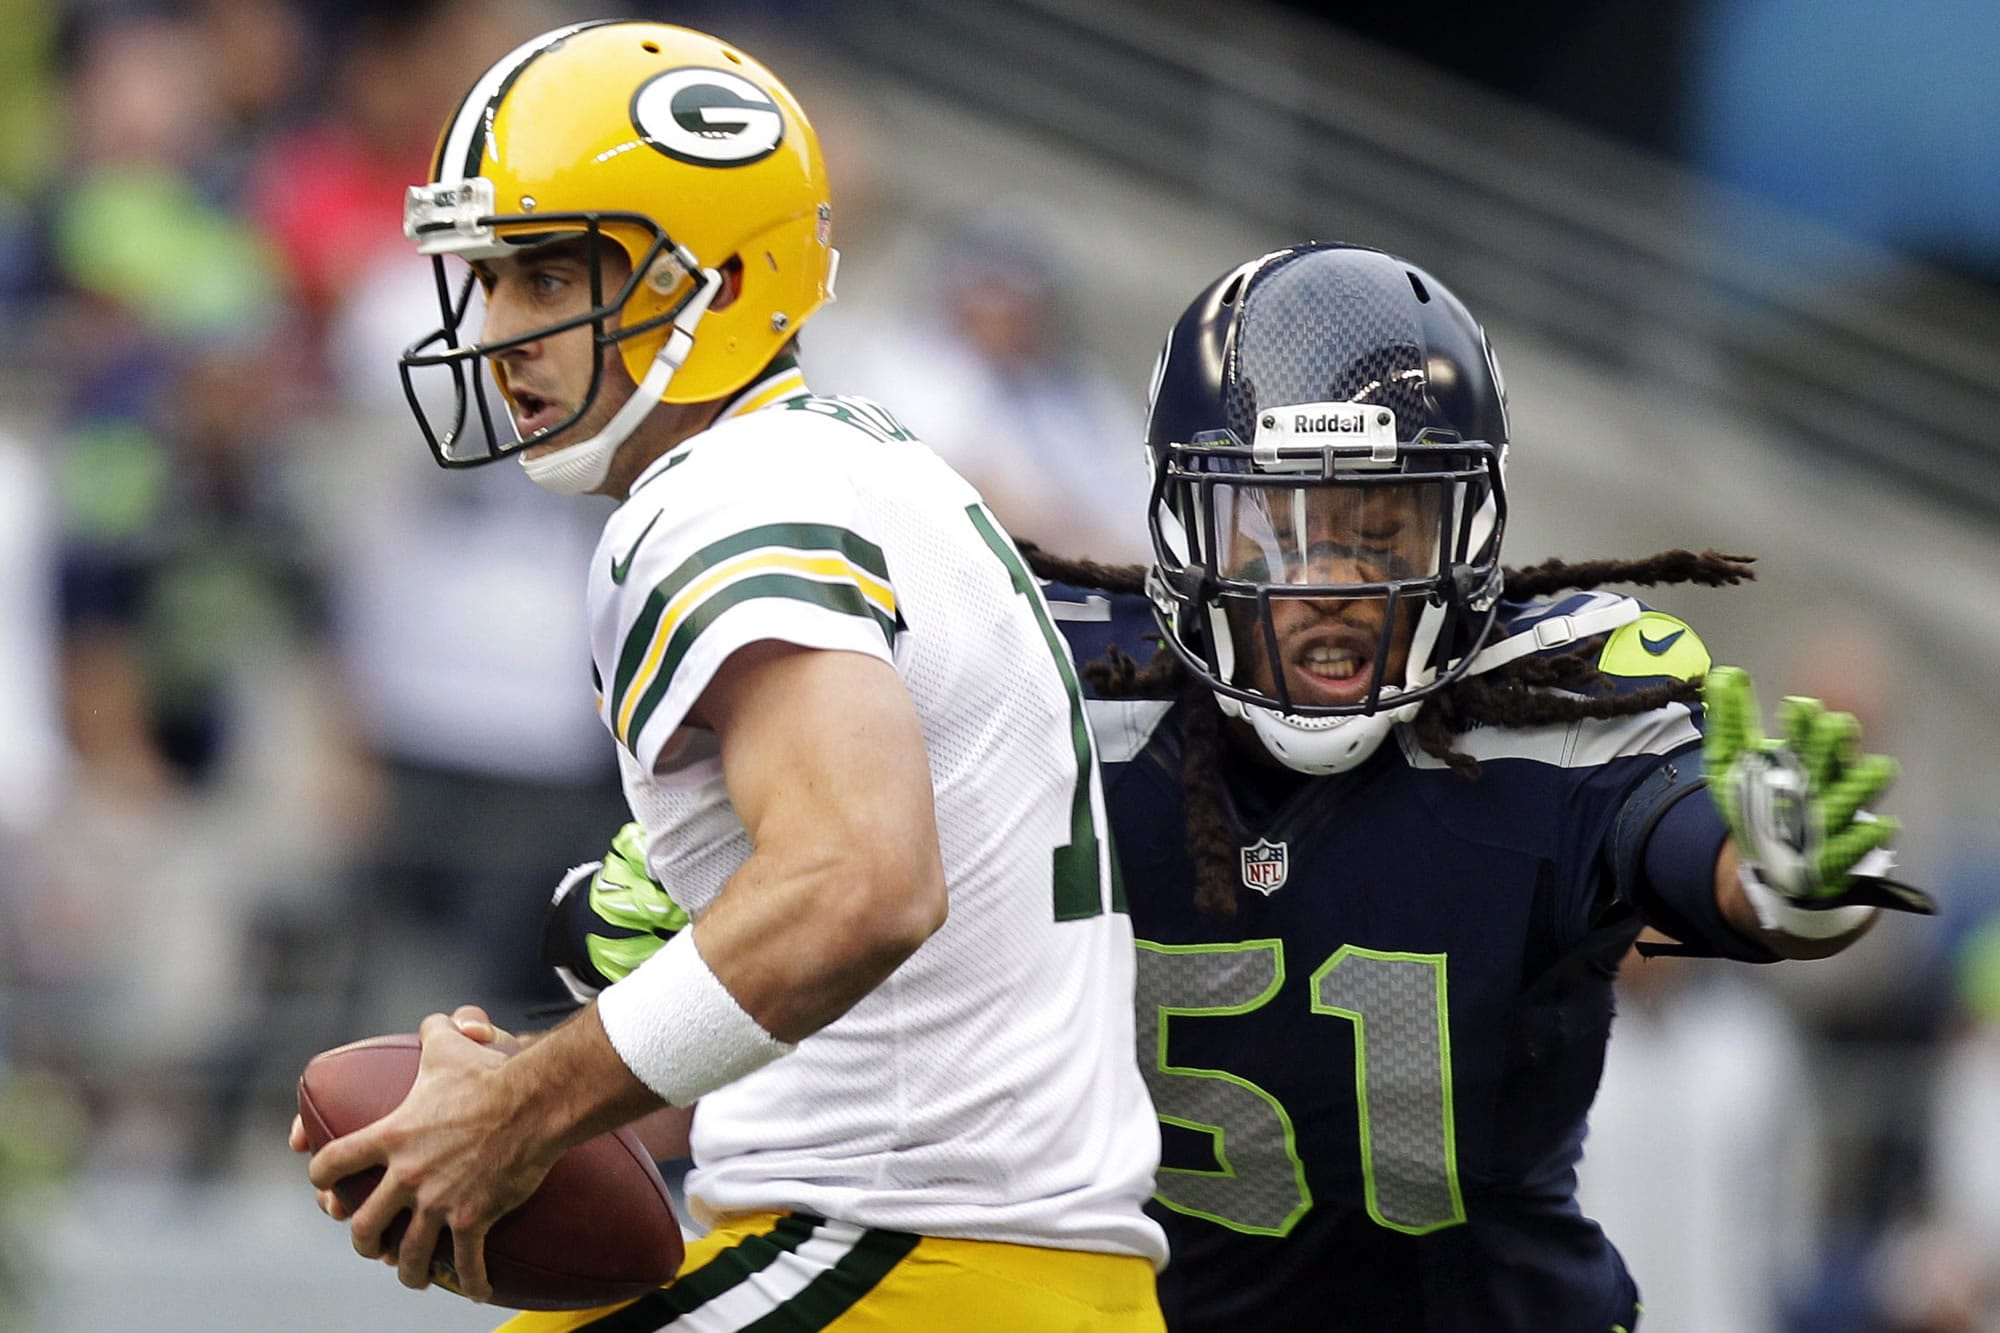 Packers quarterback Aaron Rodgers, left, is sacked by Seahawks defensive end Bruce Irvin earlier this season.